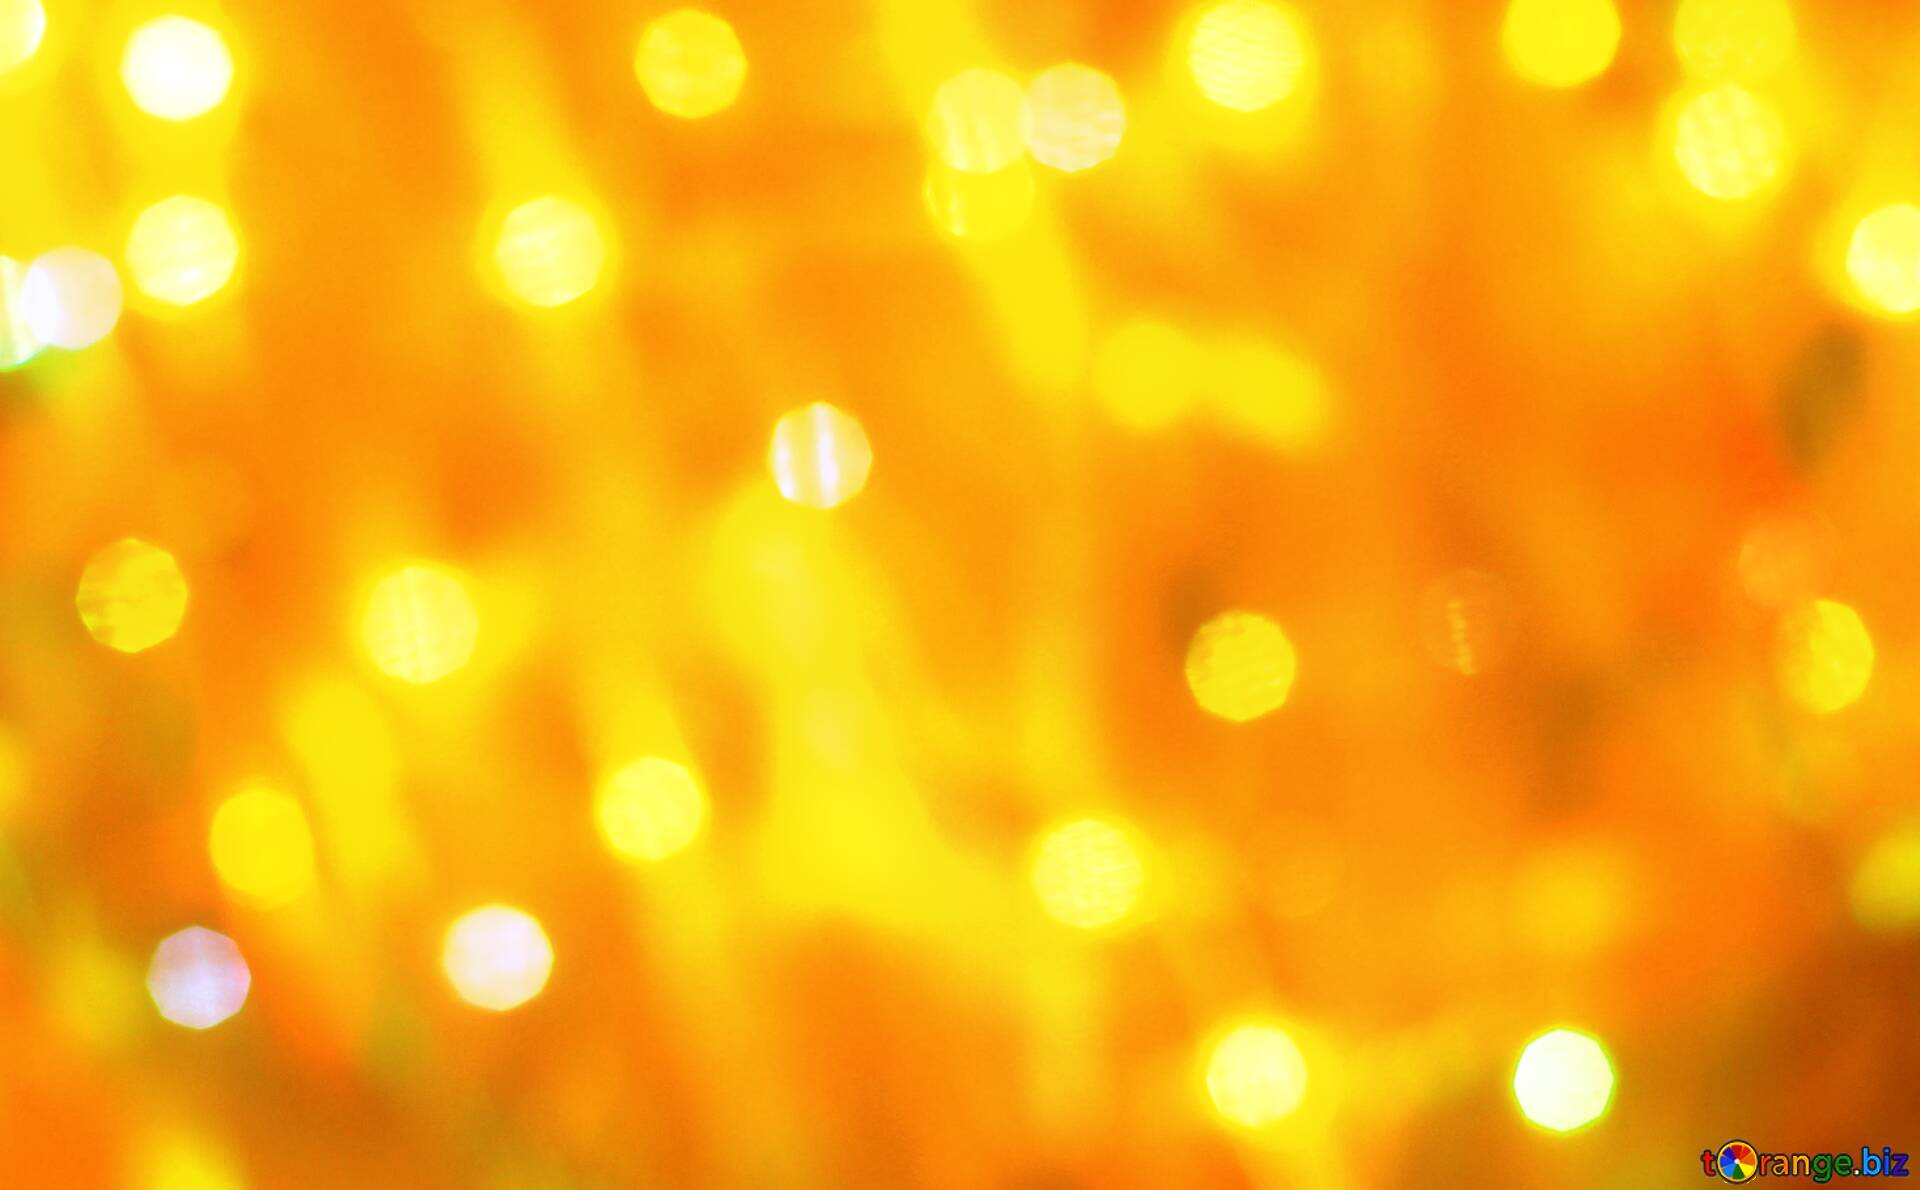 Download free picture Lights in the bokeh yellow background on CC-BY  License ~ Free Image Stock  ~ fx №194079